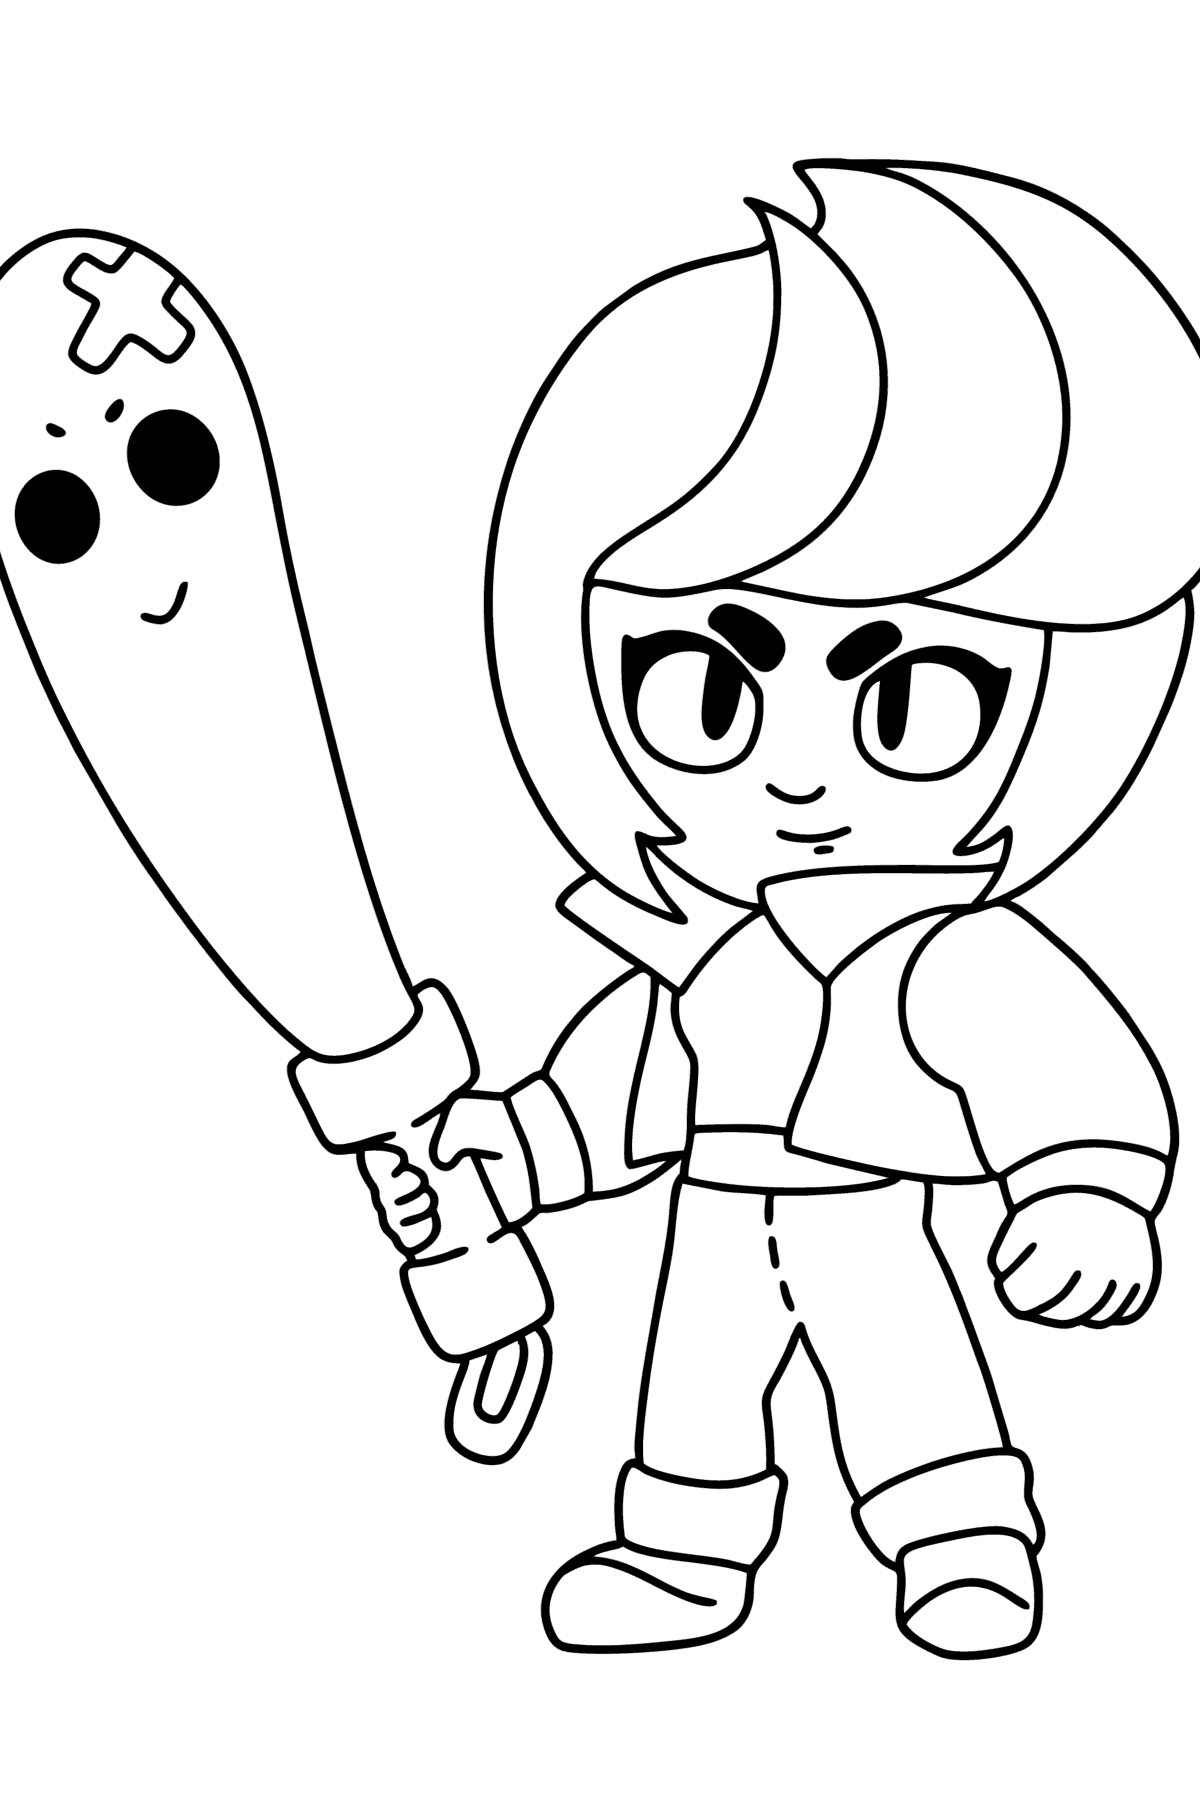 Brawl Stars Bibi coloring page - Coloring Pages for Kids